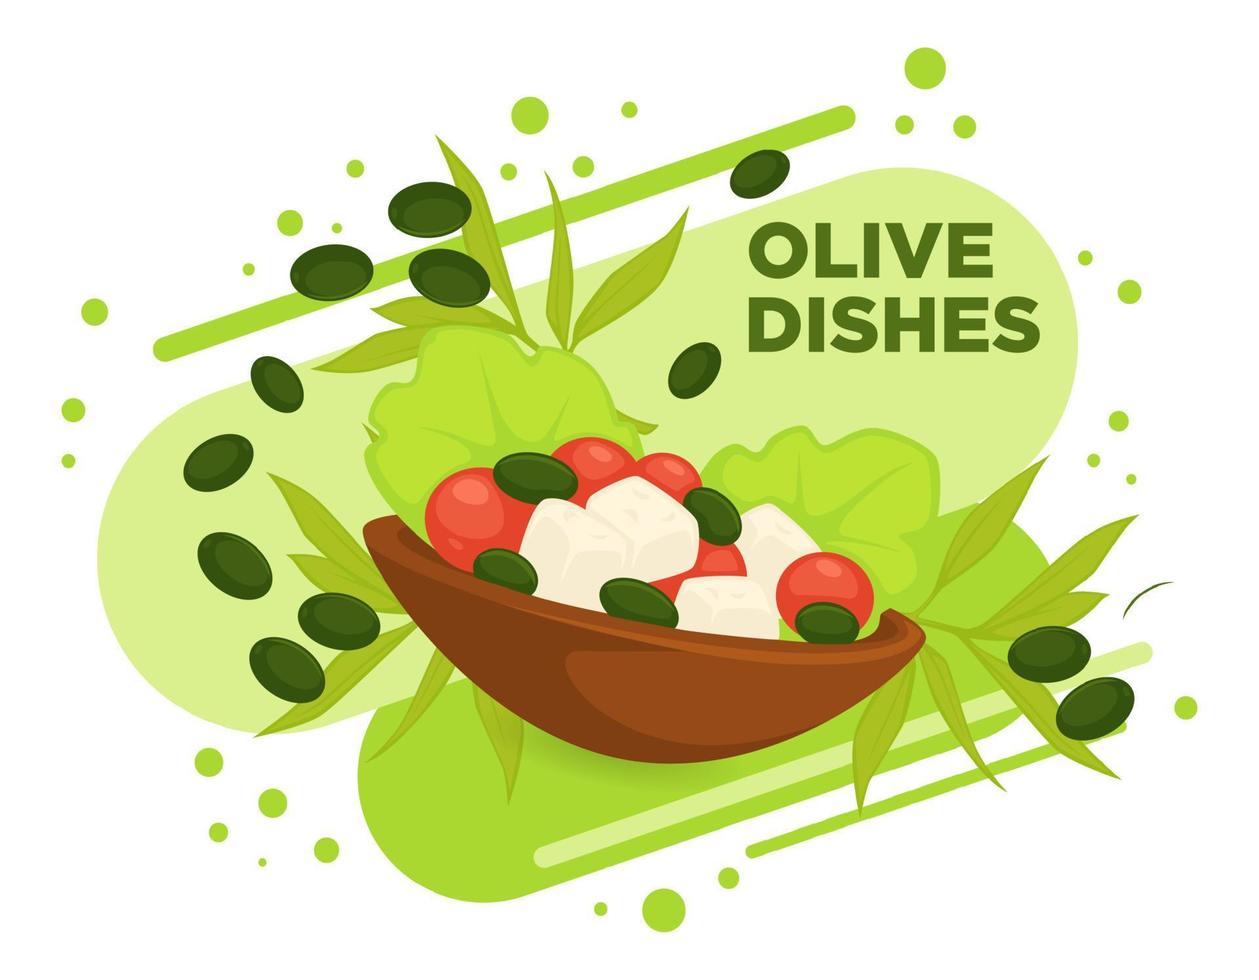 Olive dishes, healthy dieting and nutrition food vector